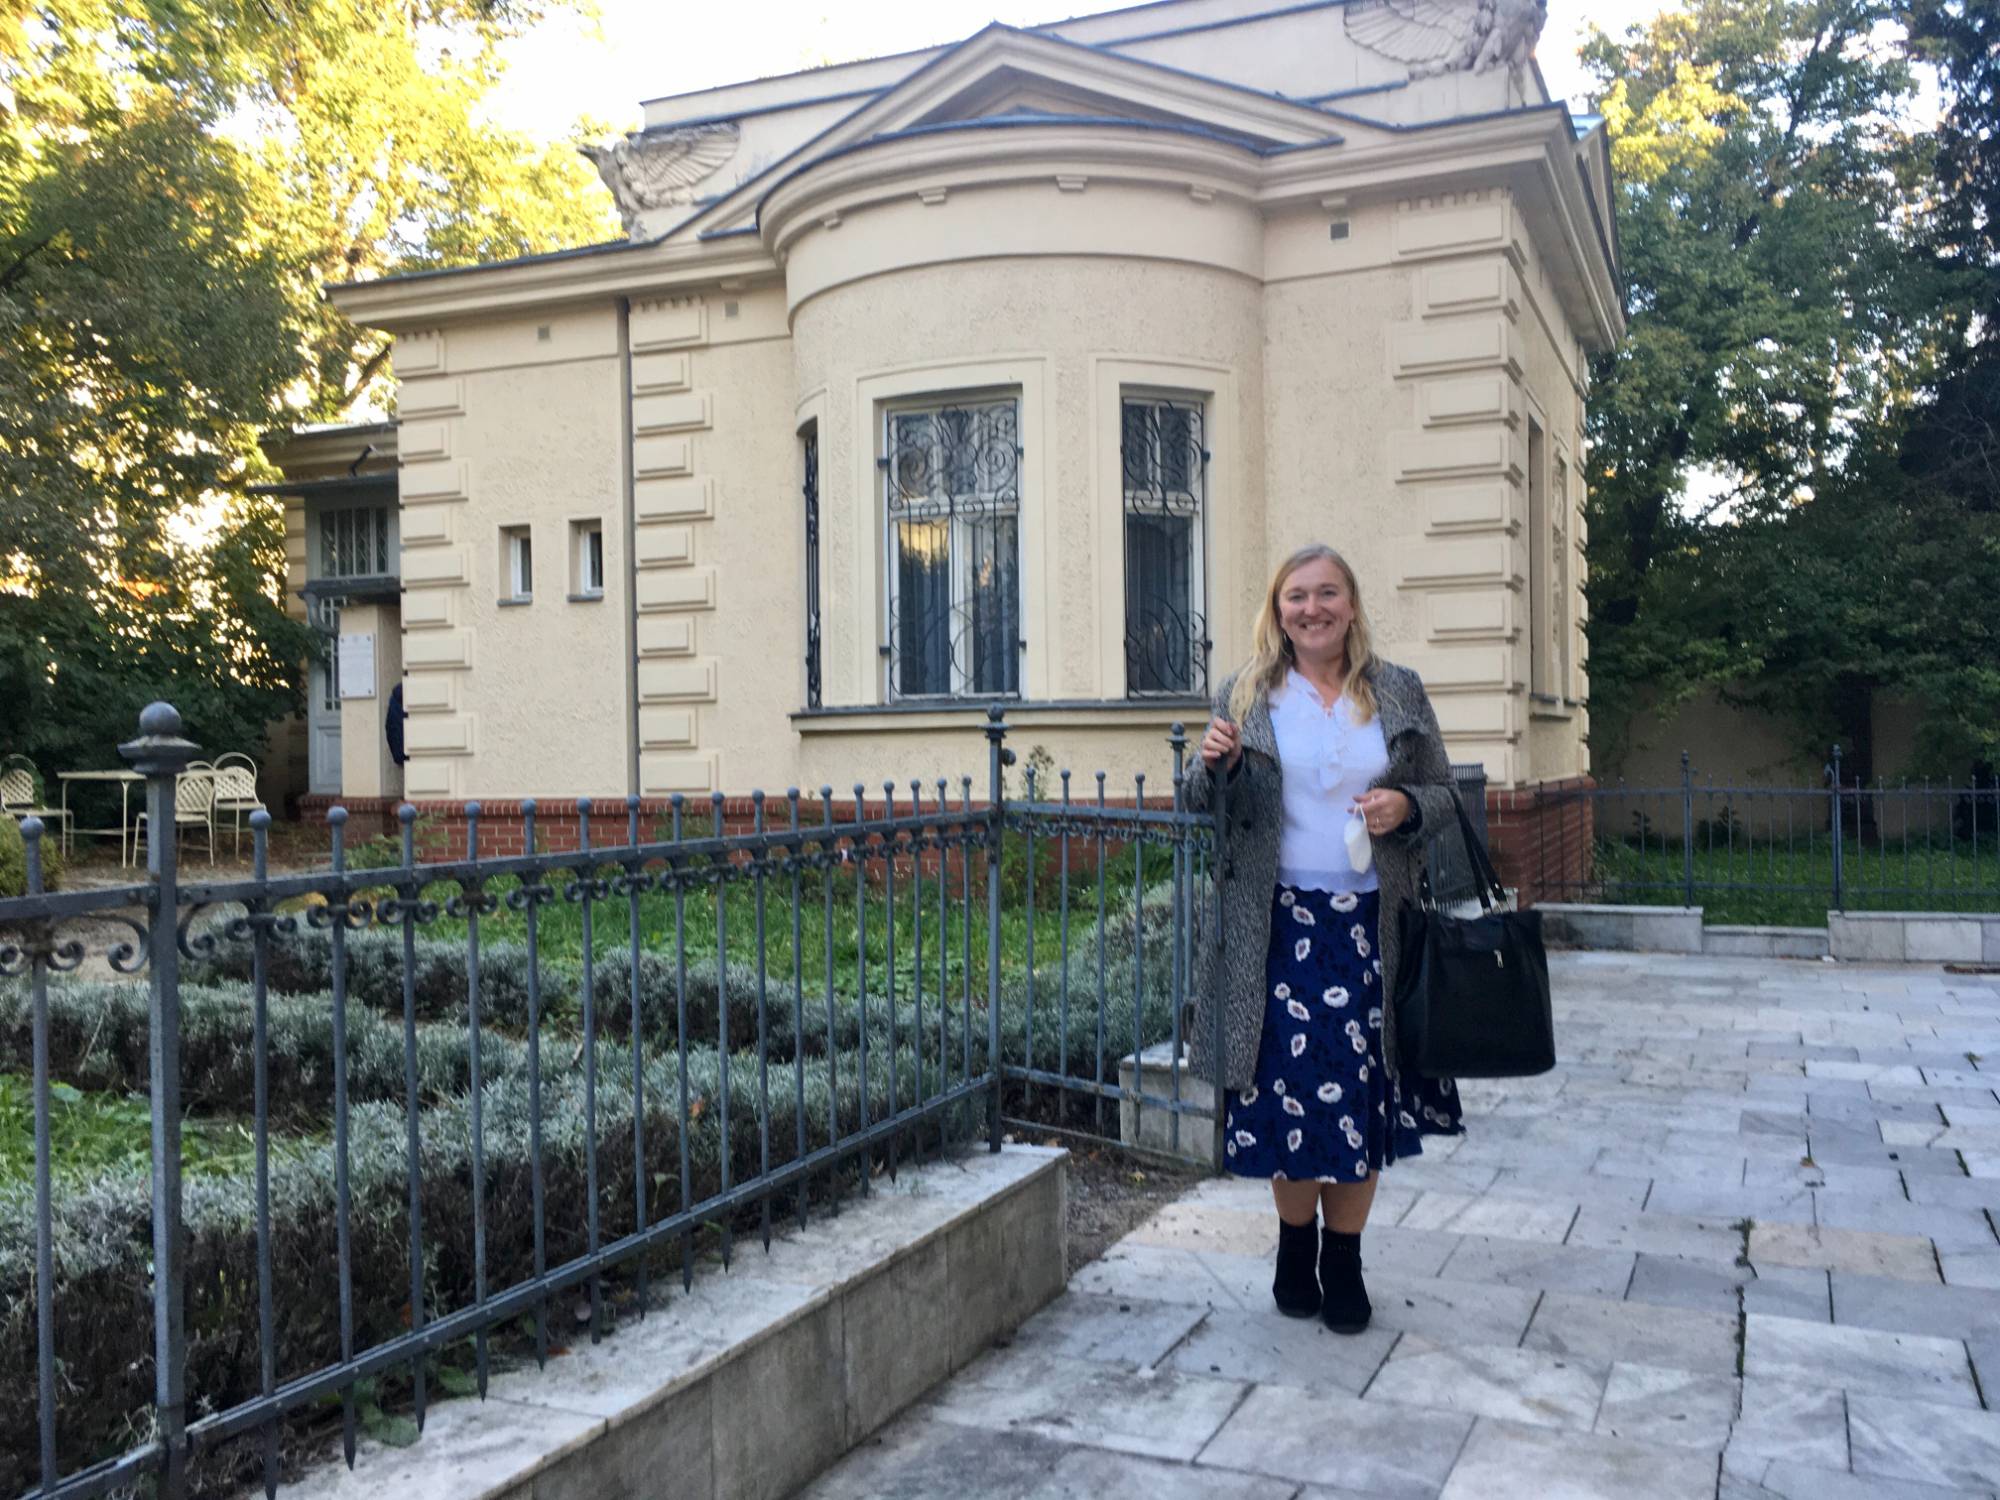 A photo of Leos Janacek's House with Marlen Vavrikova standing in front of it.